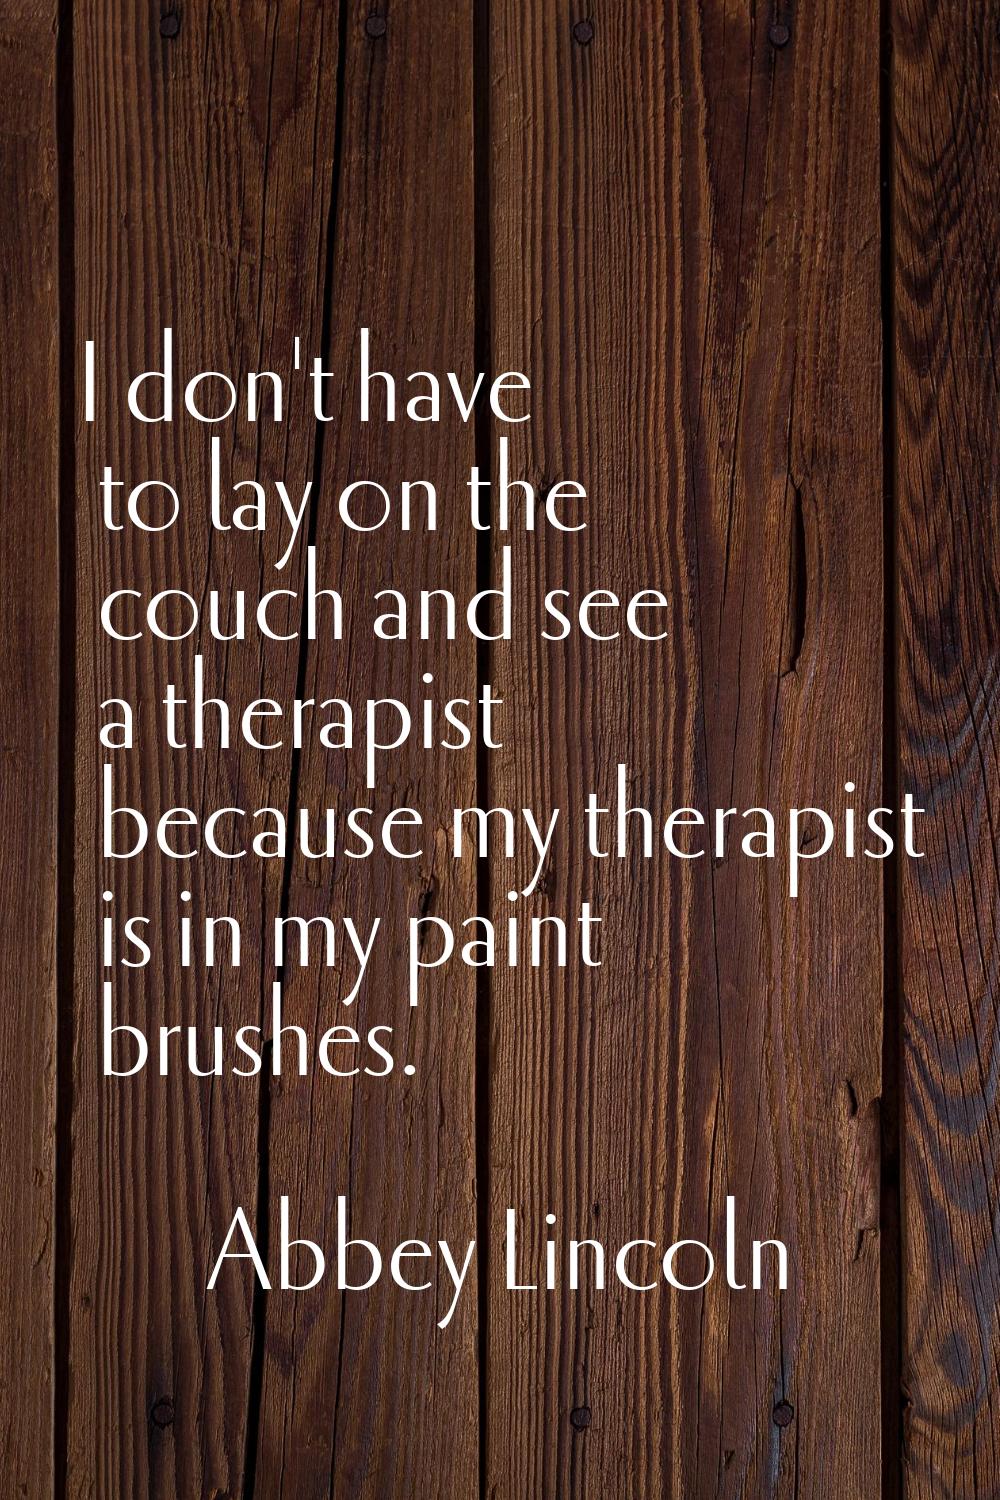 I don't have to lay on the couch and see a therapist because my therapist is in my paint brushes.